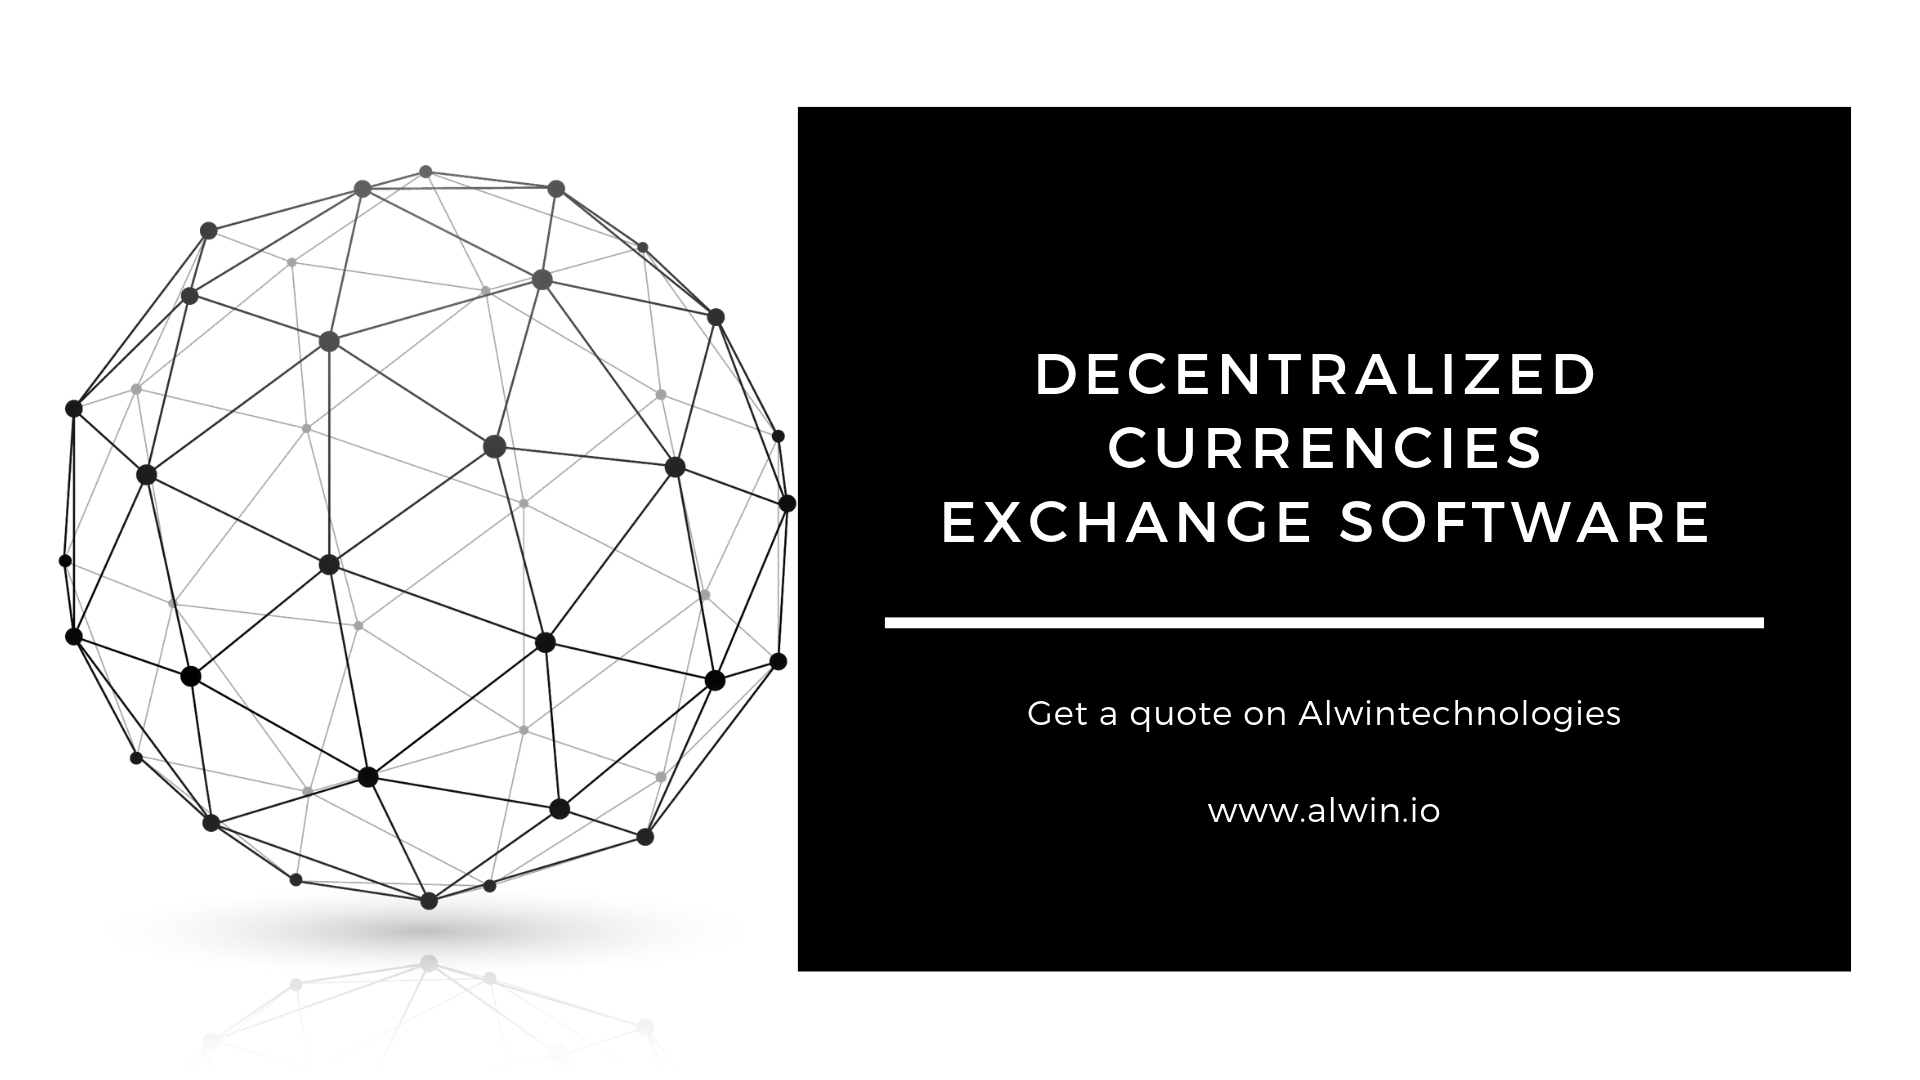 decentralized-exchange-software-for-decentralized-currencies